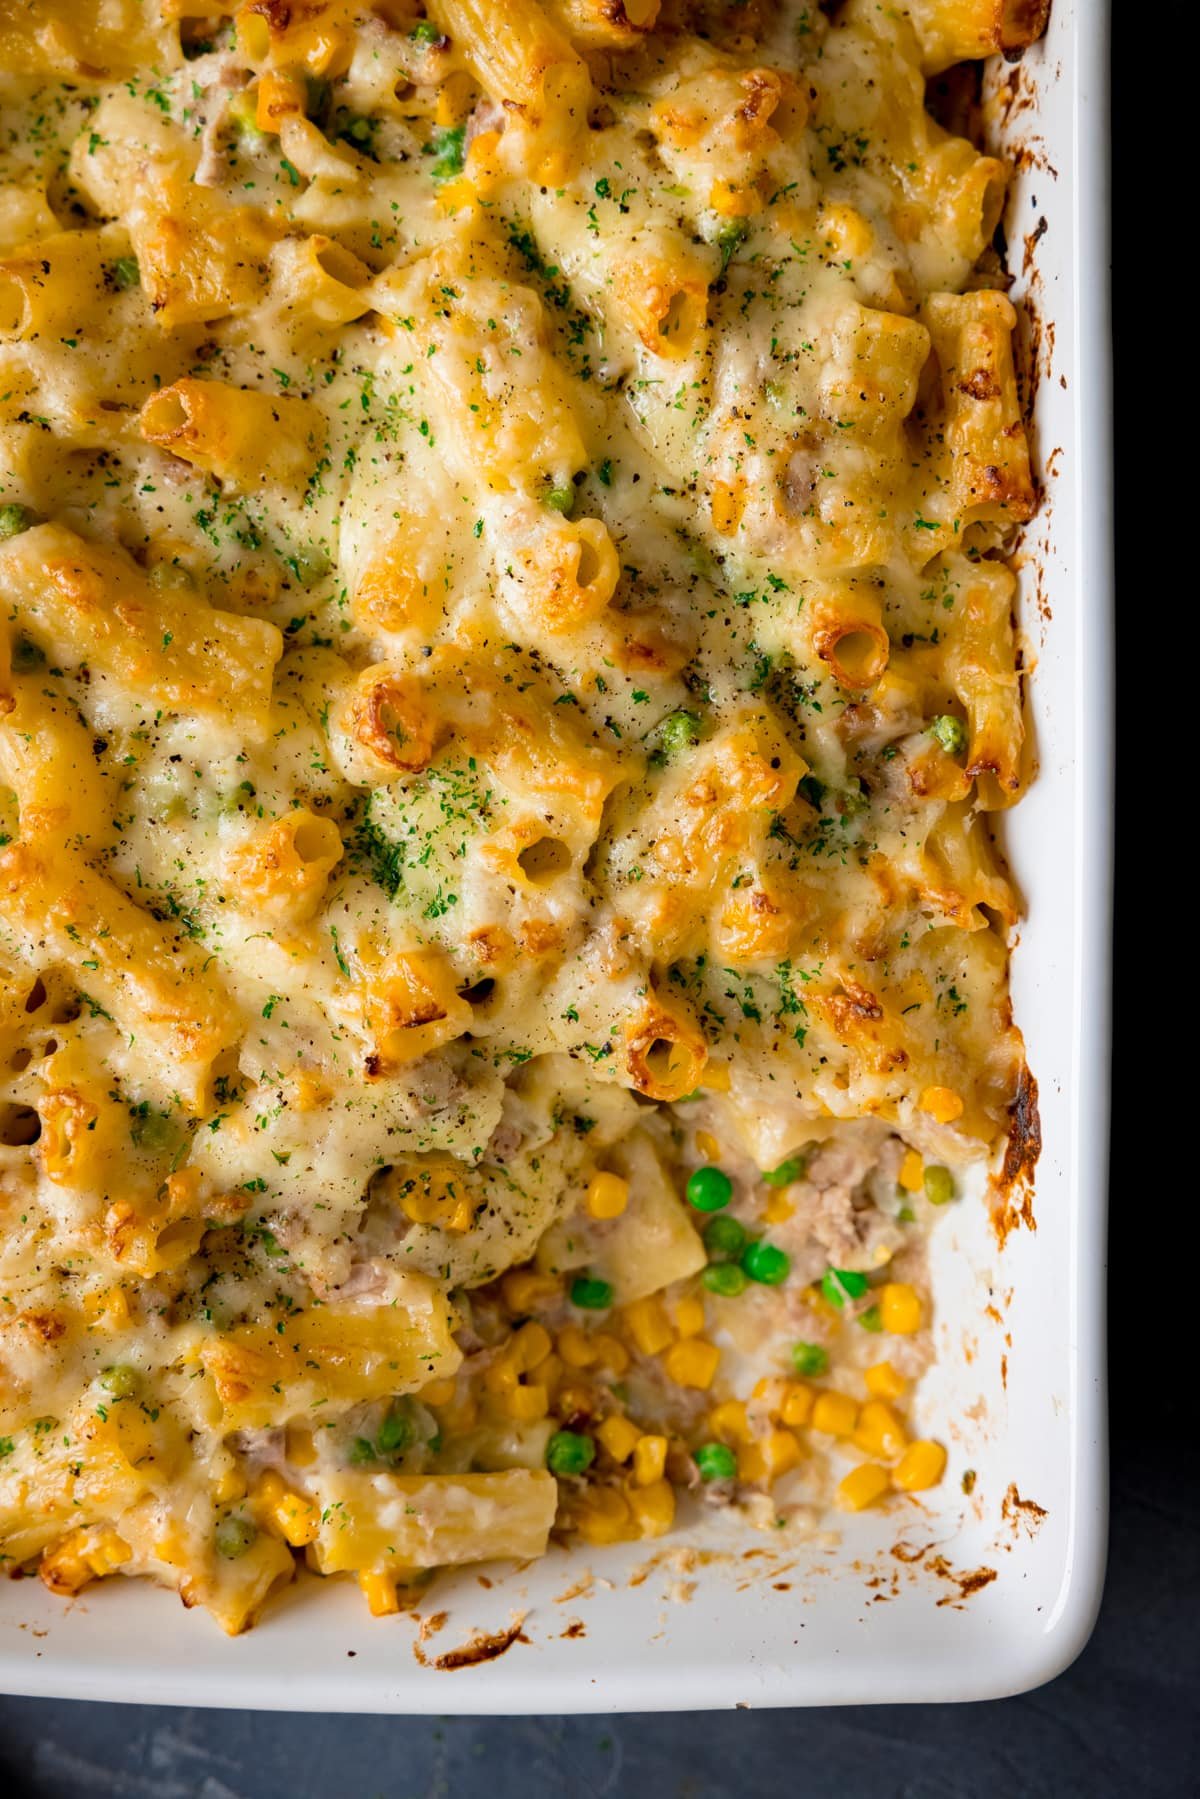 Overhead image of creamy tuna pasta bake in a white dish with a scoopful taken out.